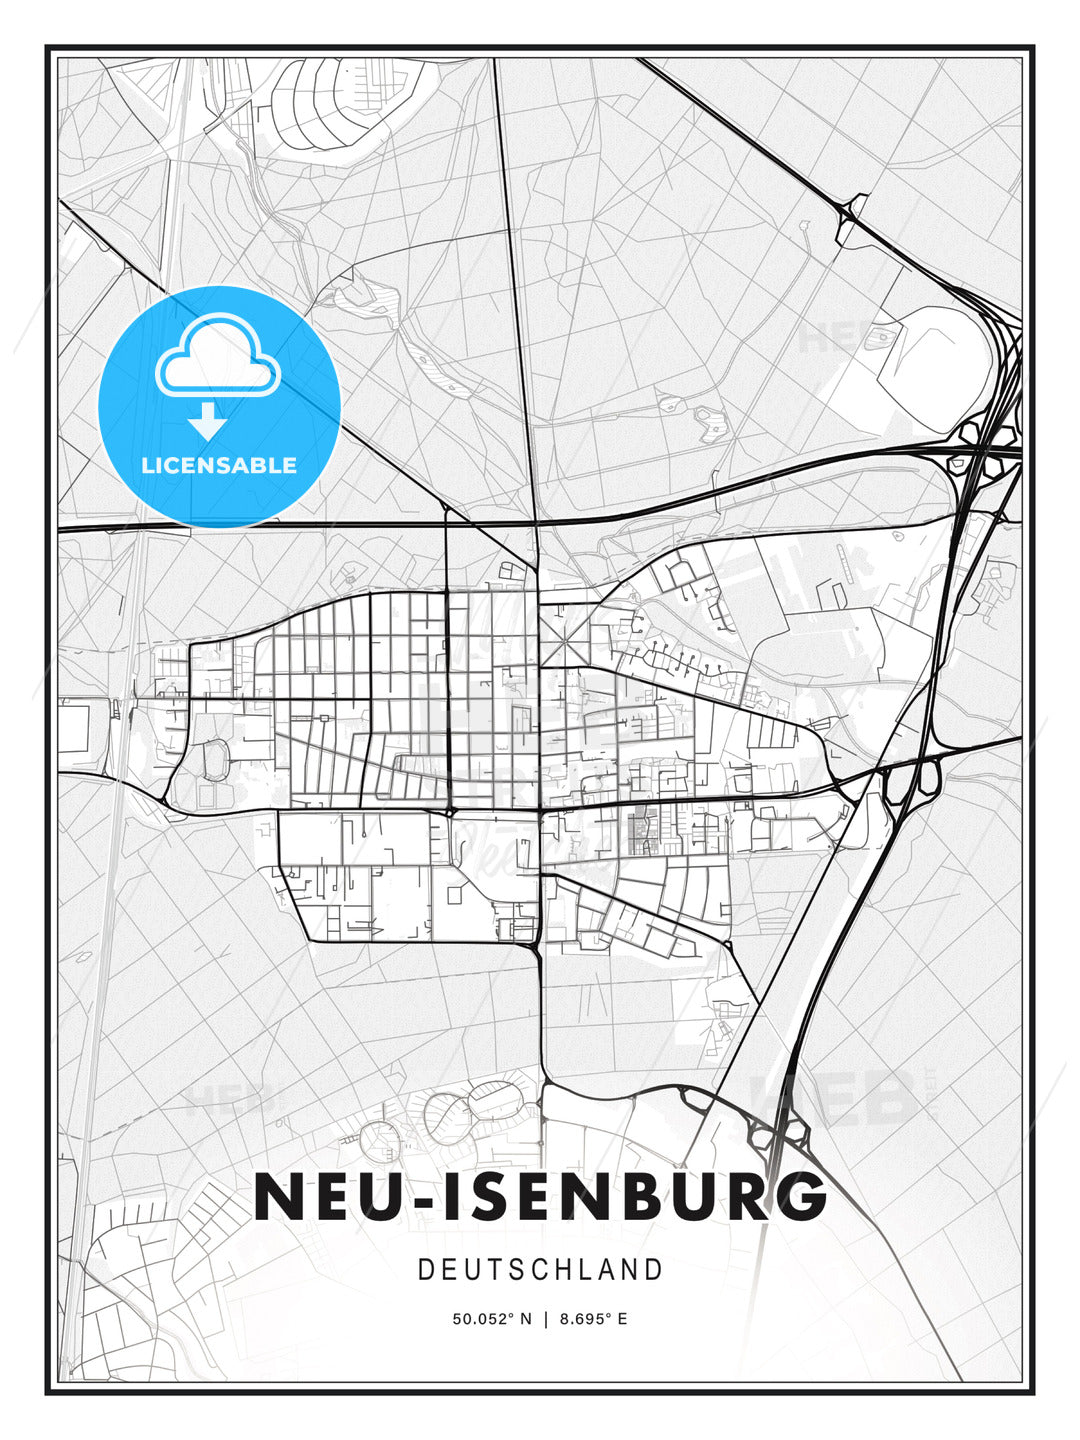 Neu-Isenburg, Germany, Modern Print Template in Various Formats - HEBSTREITS Sketches